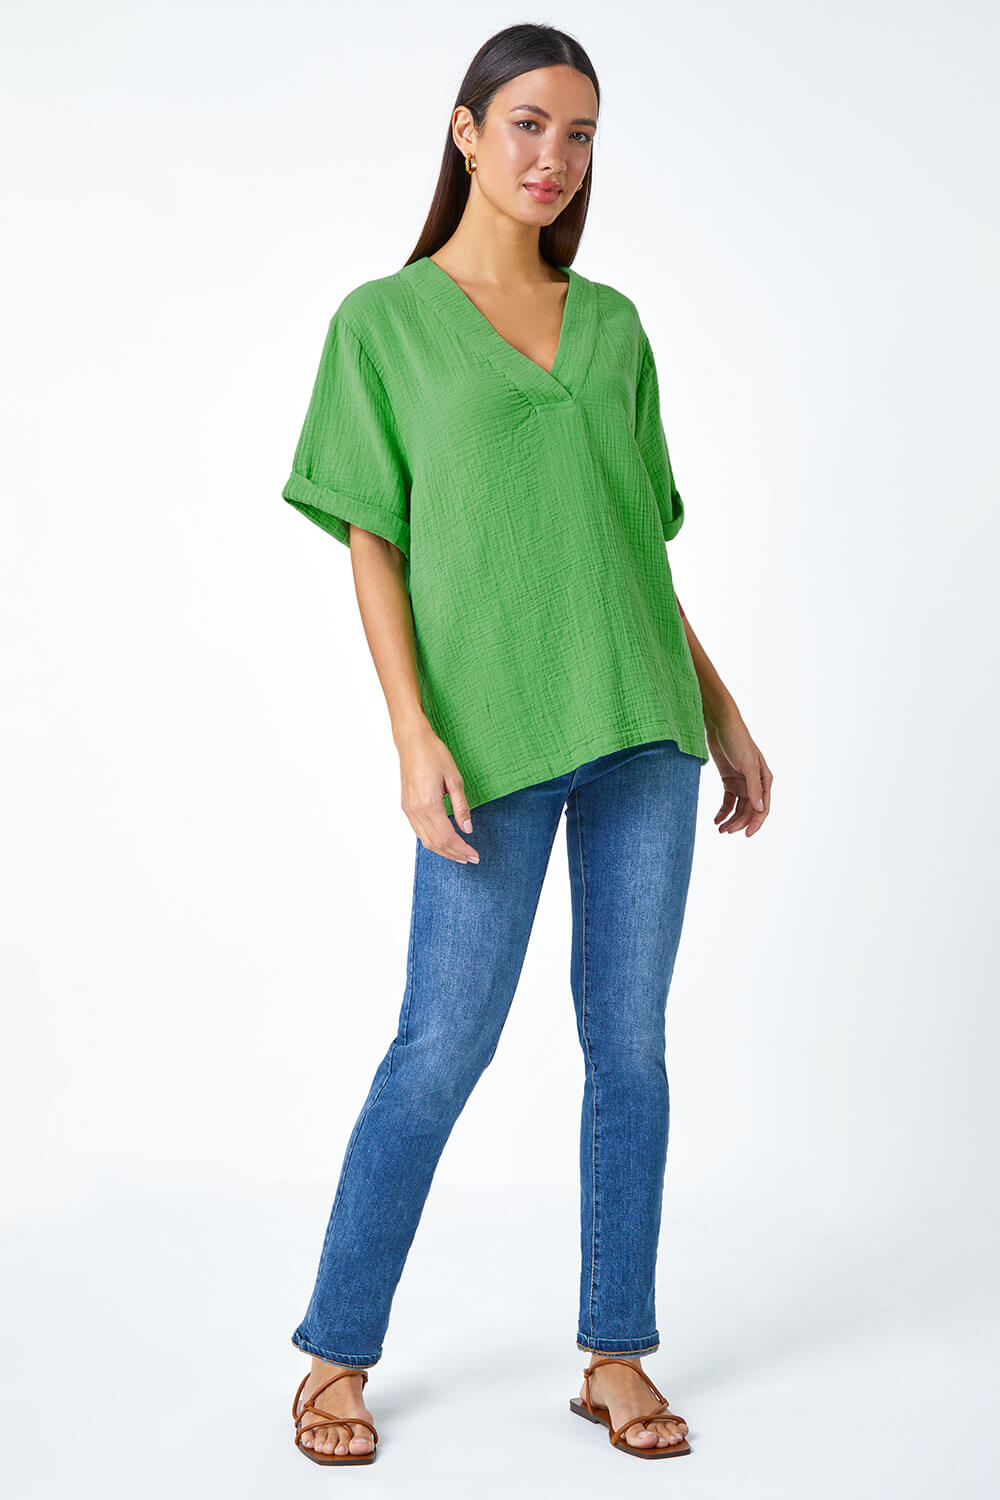 Green Textured Cotton Relaxed T-Shirt, Image 2 of 5